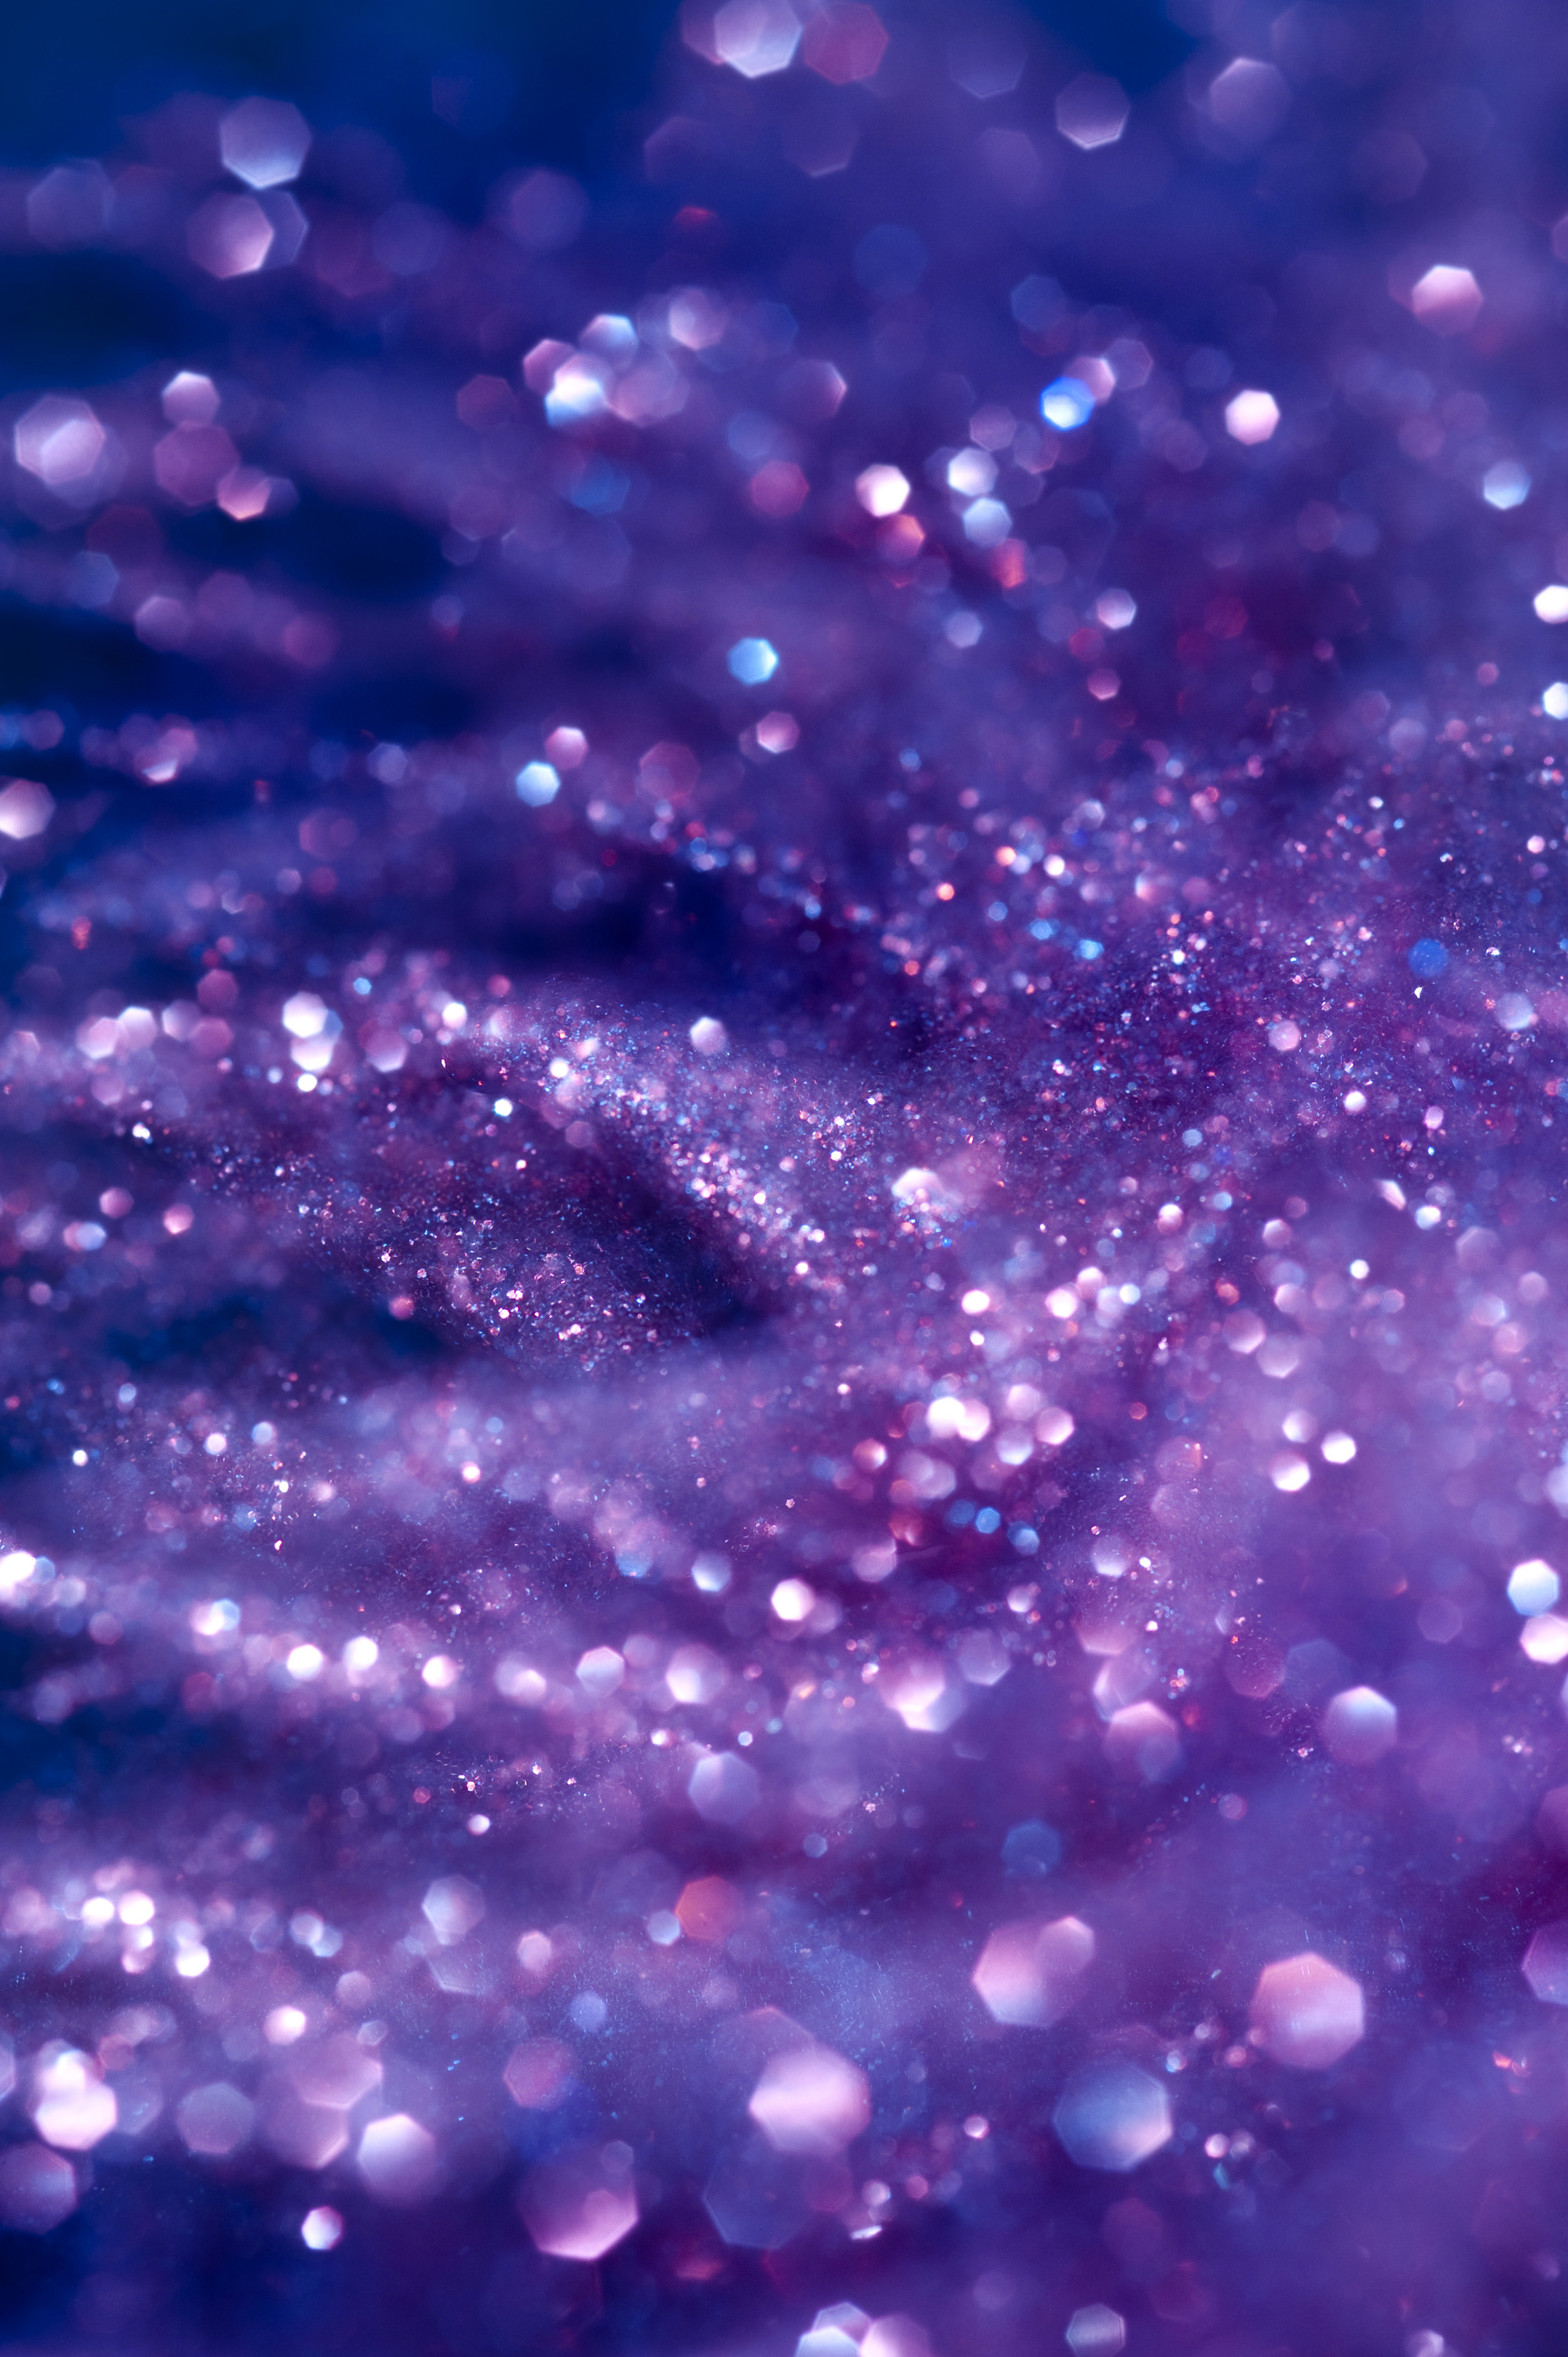 Free download purple background of defuse glitter and specular highlights [1996x3000] for your Desktop, Mobile & Tablet. Explore Cool Purple iPhone Wallpaper. iOS 8 Flower Wallpaper, Pink Wallpaper iPhone, iOS 6 Original Wallpaper